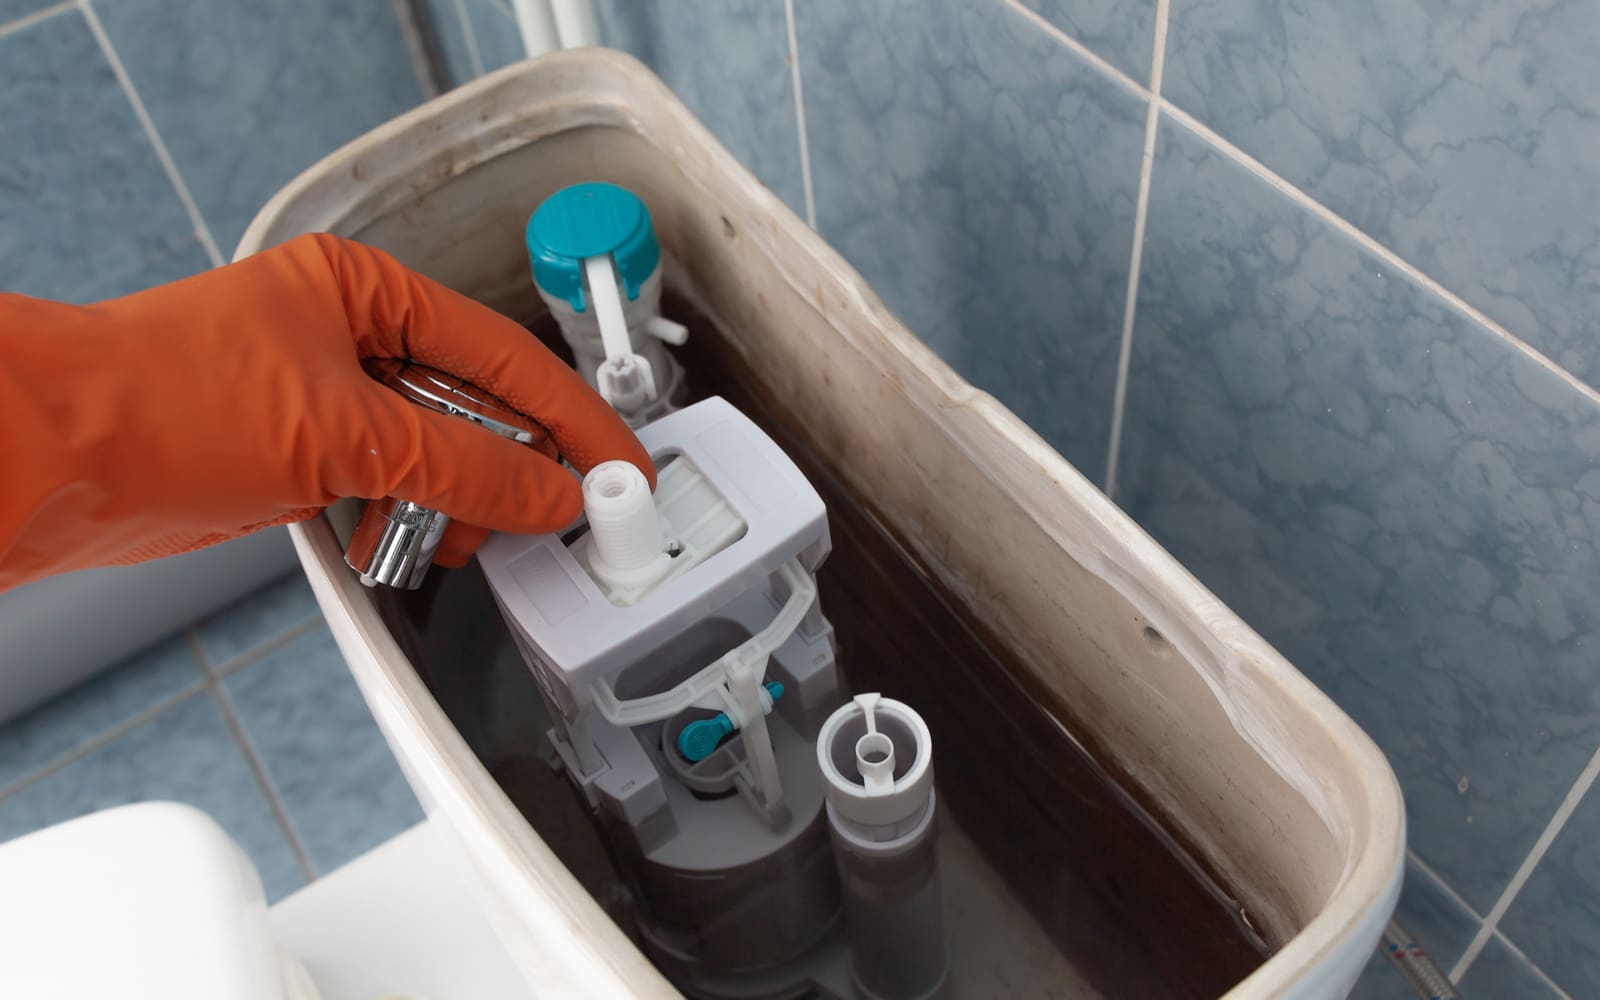 Person replacing toilet tank parts while wearing rubber gloves